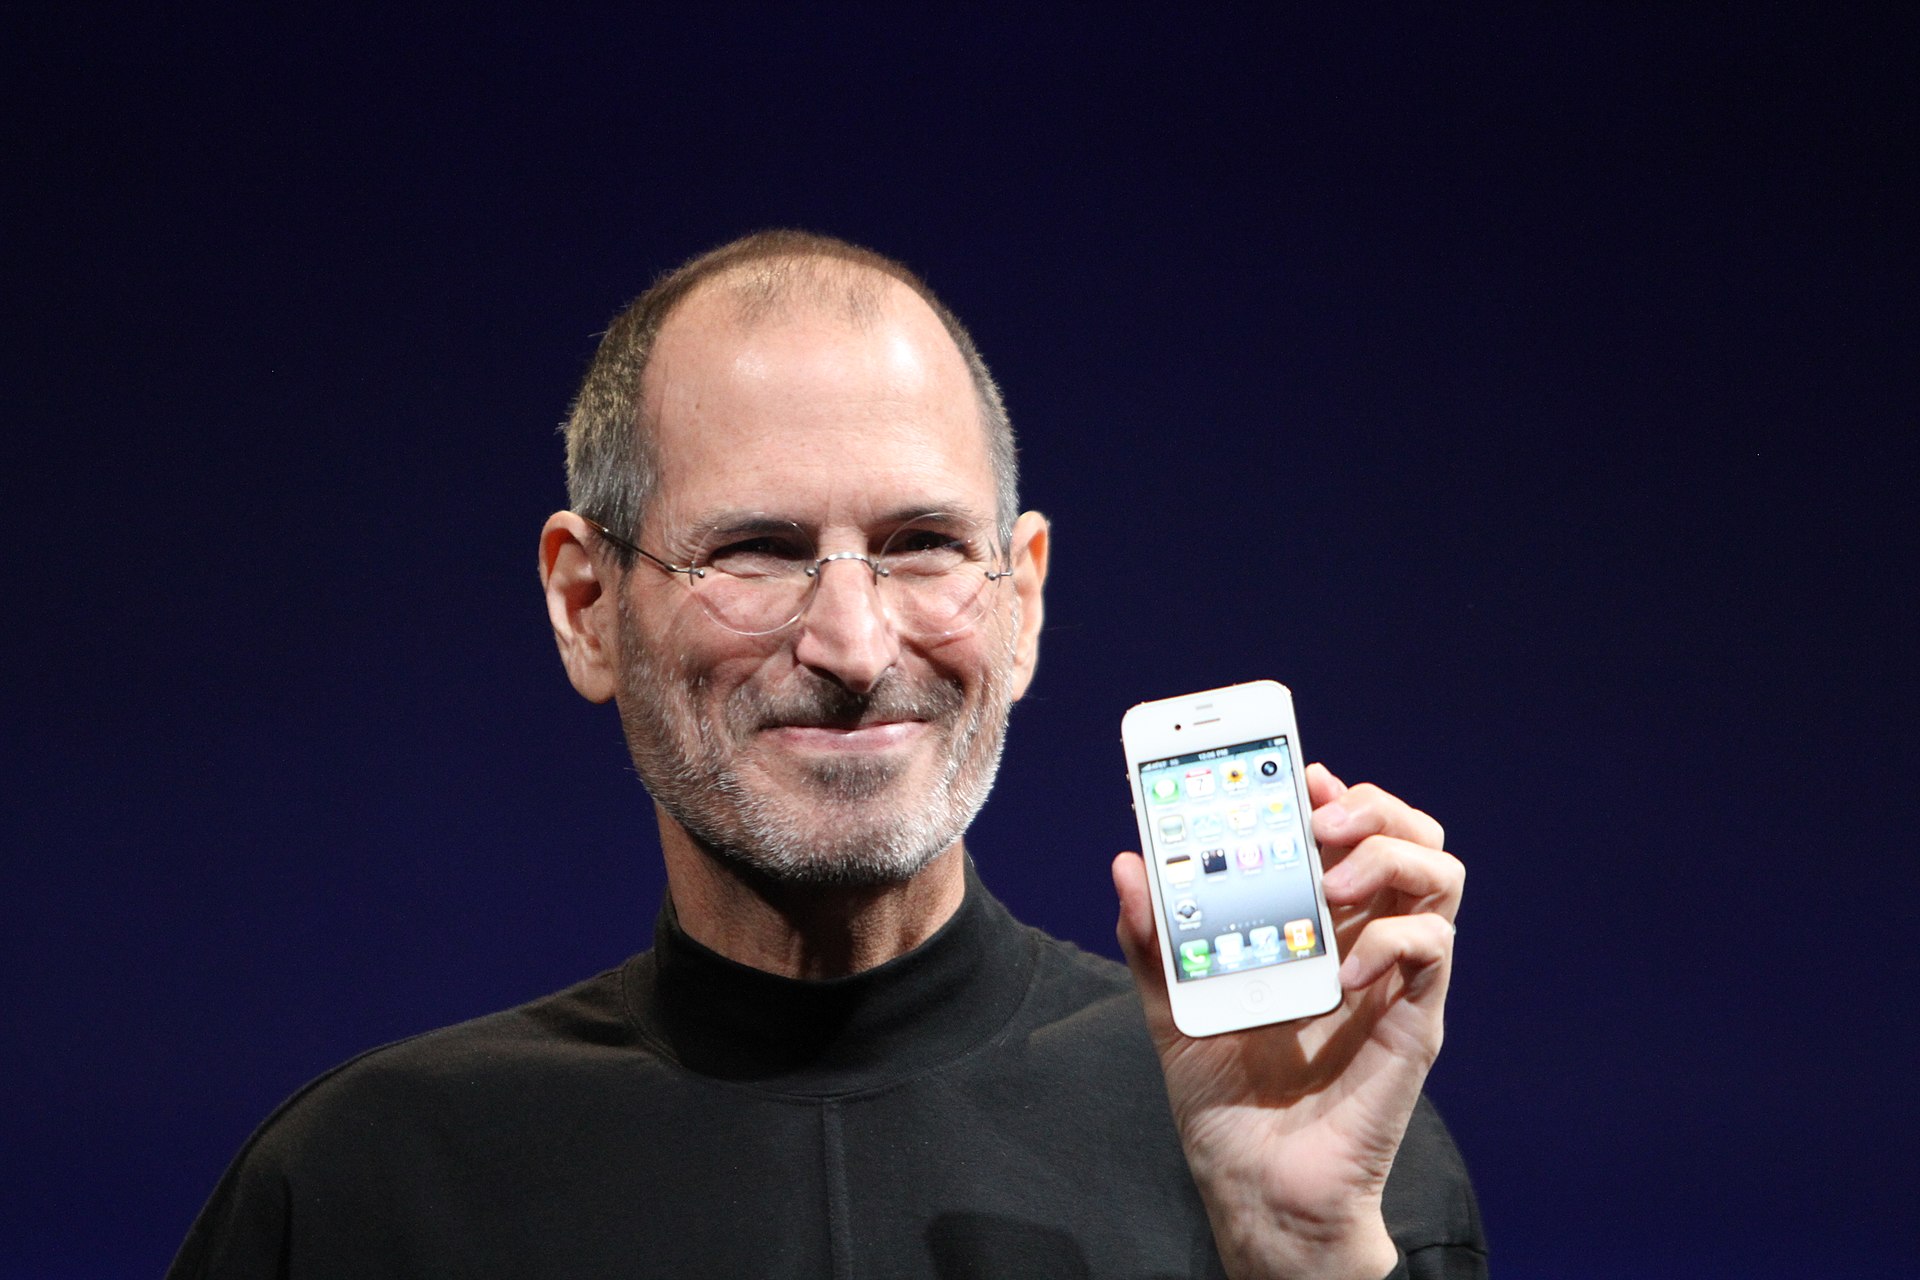 Steve Jobs (1955-2011): A Man of Our Times